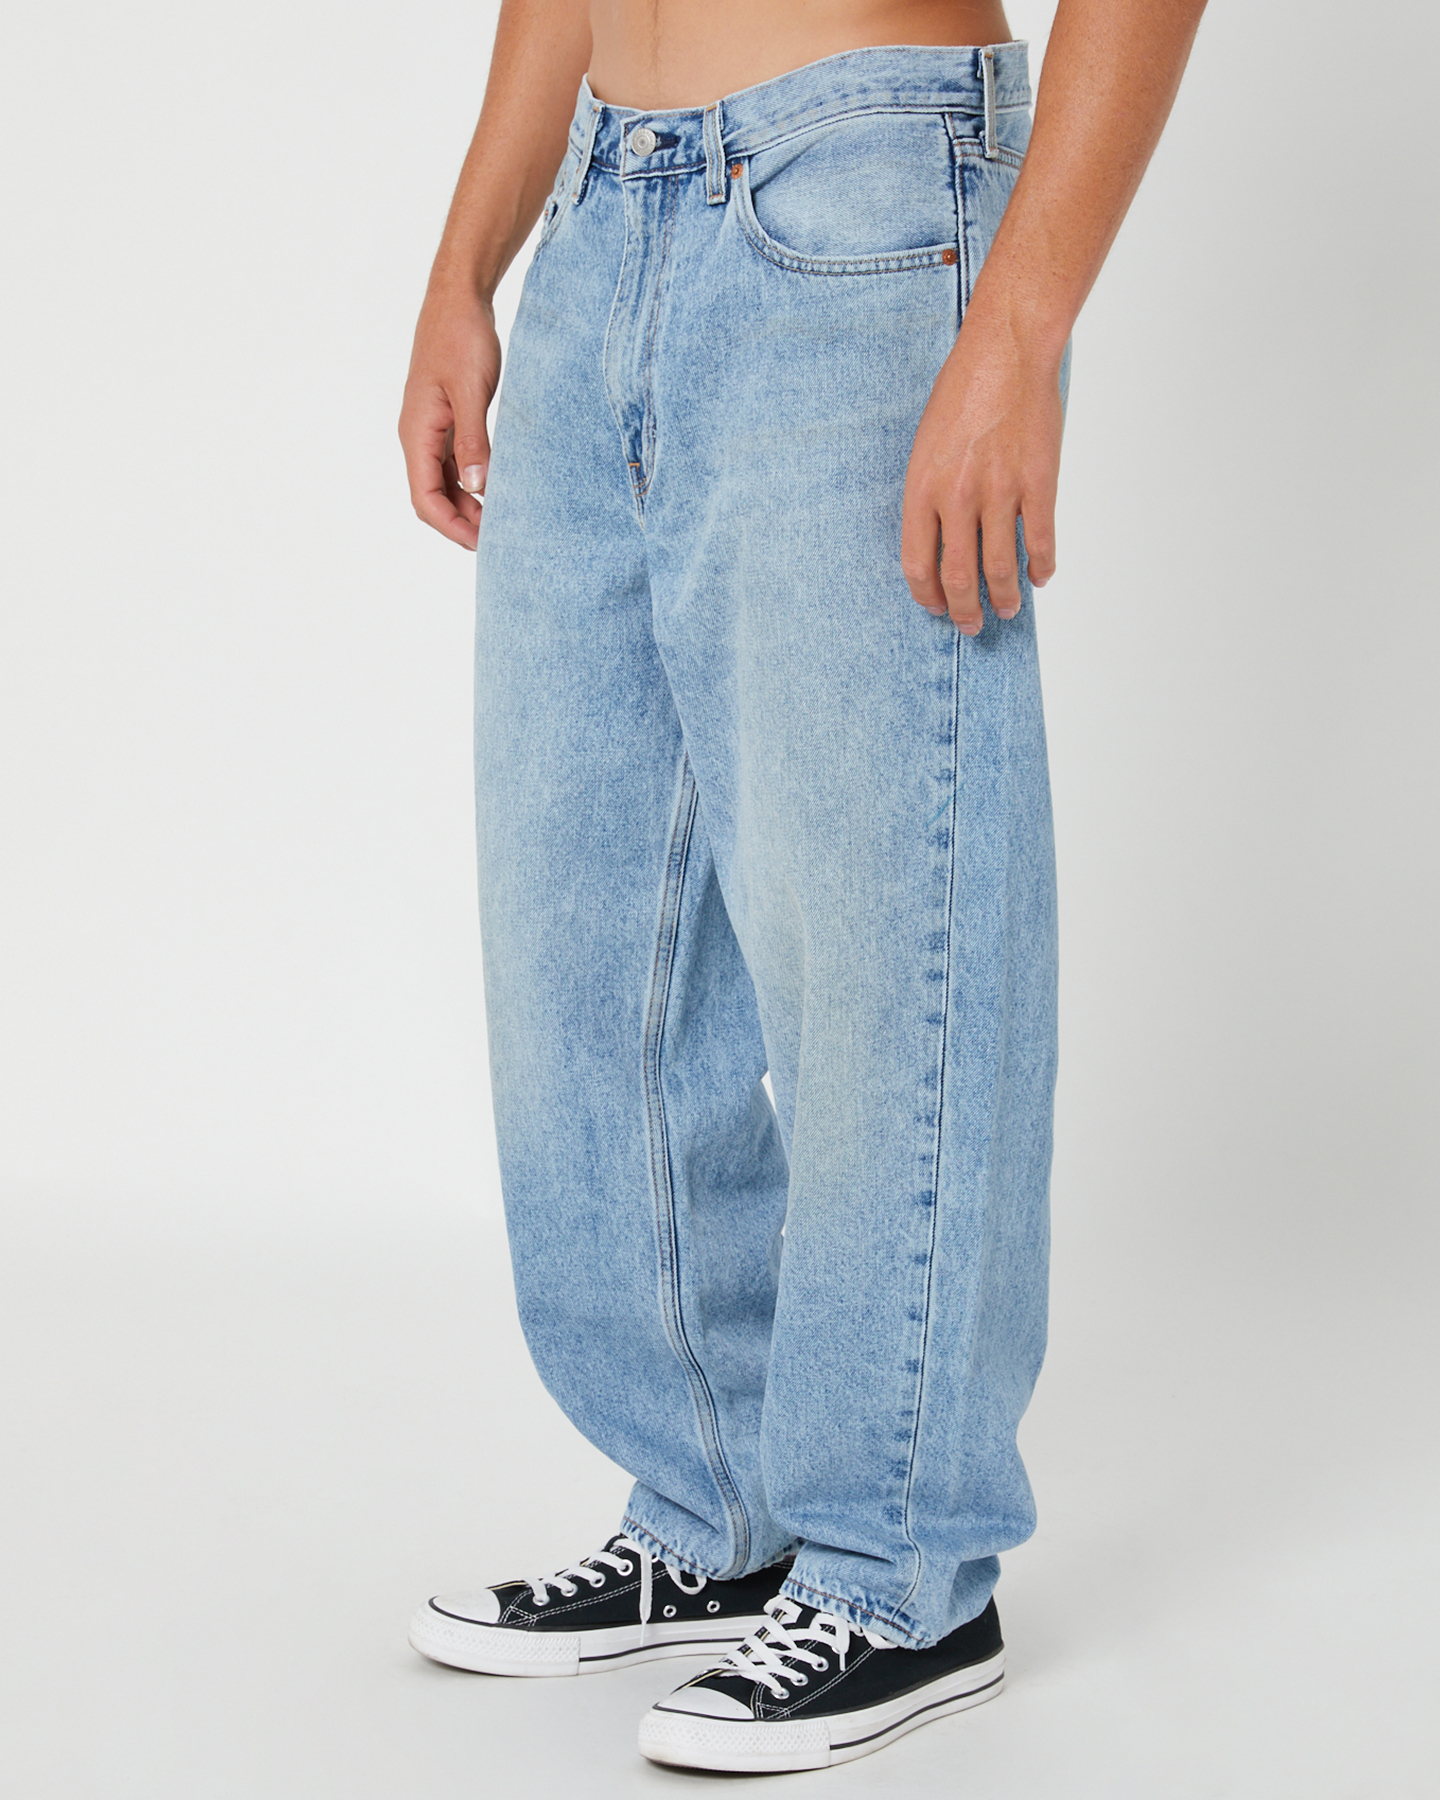 Levi's Stay Baggy Mens Tapered Jean - Travelling Light | SurfStitch